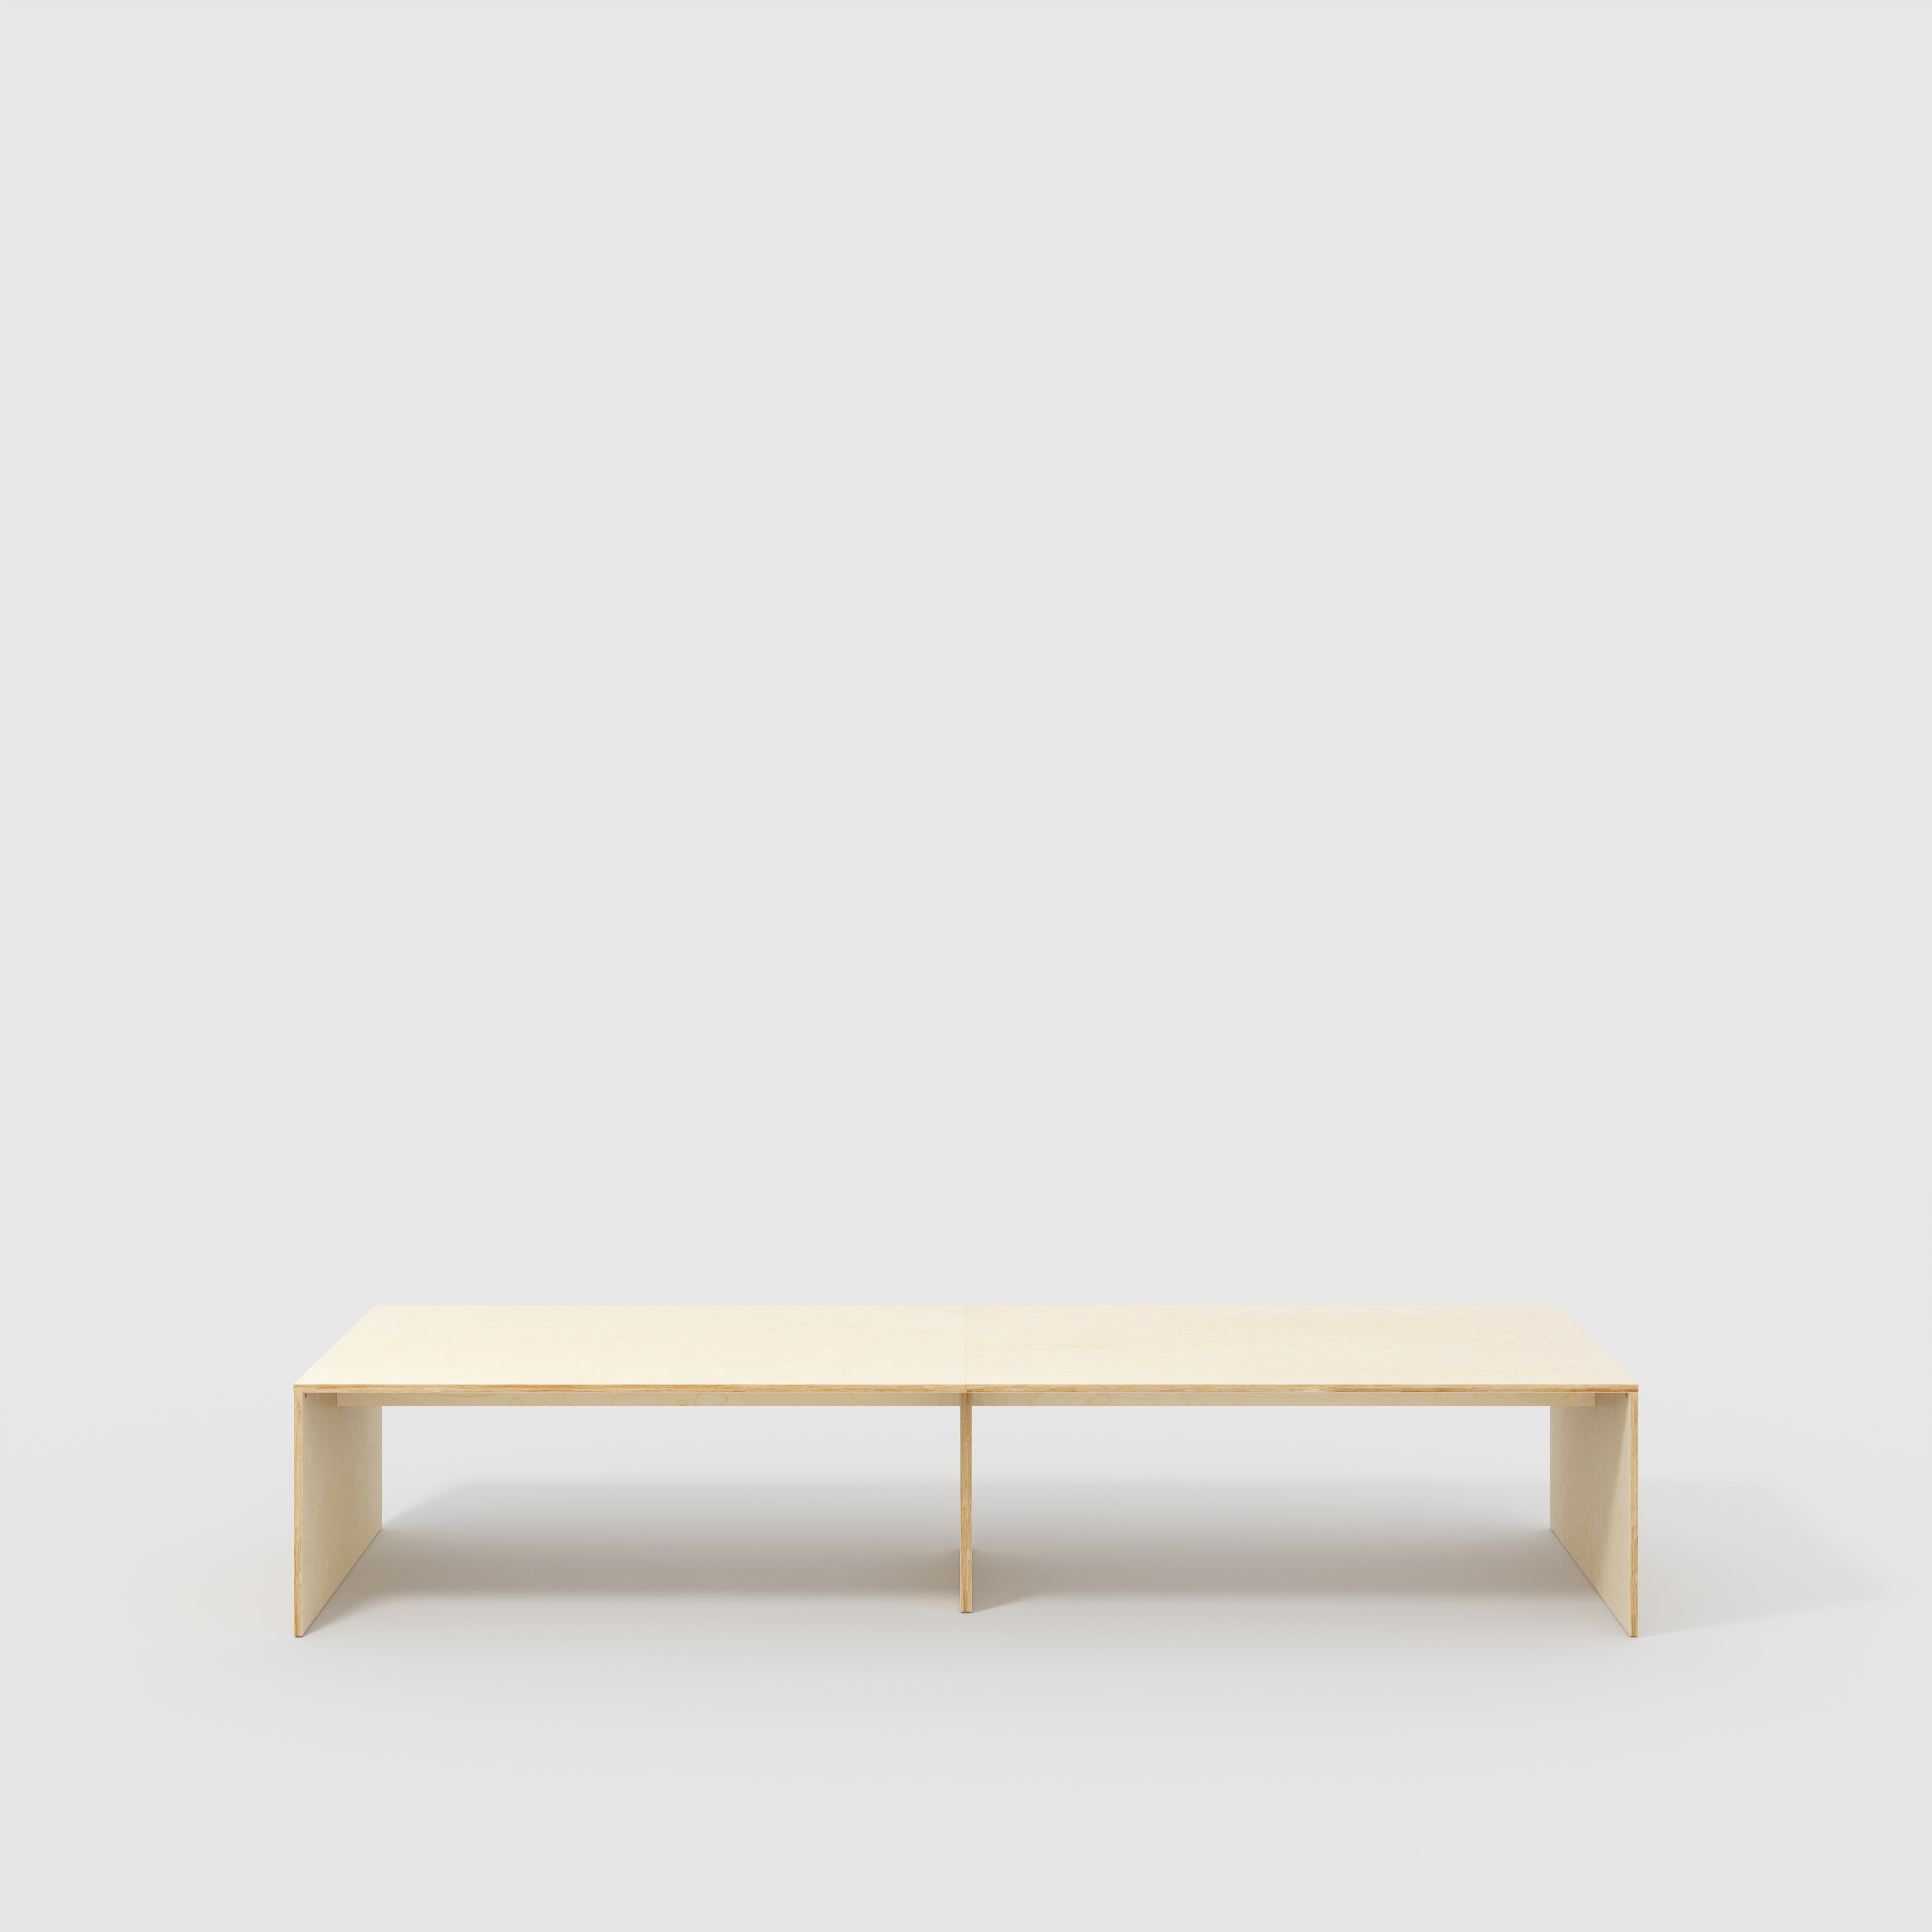 Table with Solid Sides - Plywood Birch - 4000(w) x 1000(d) x 735(h)